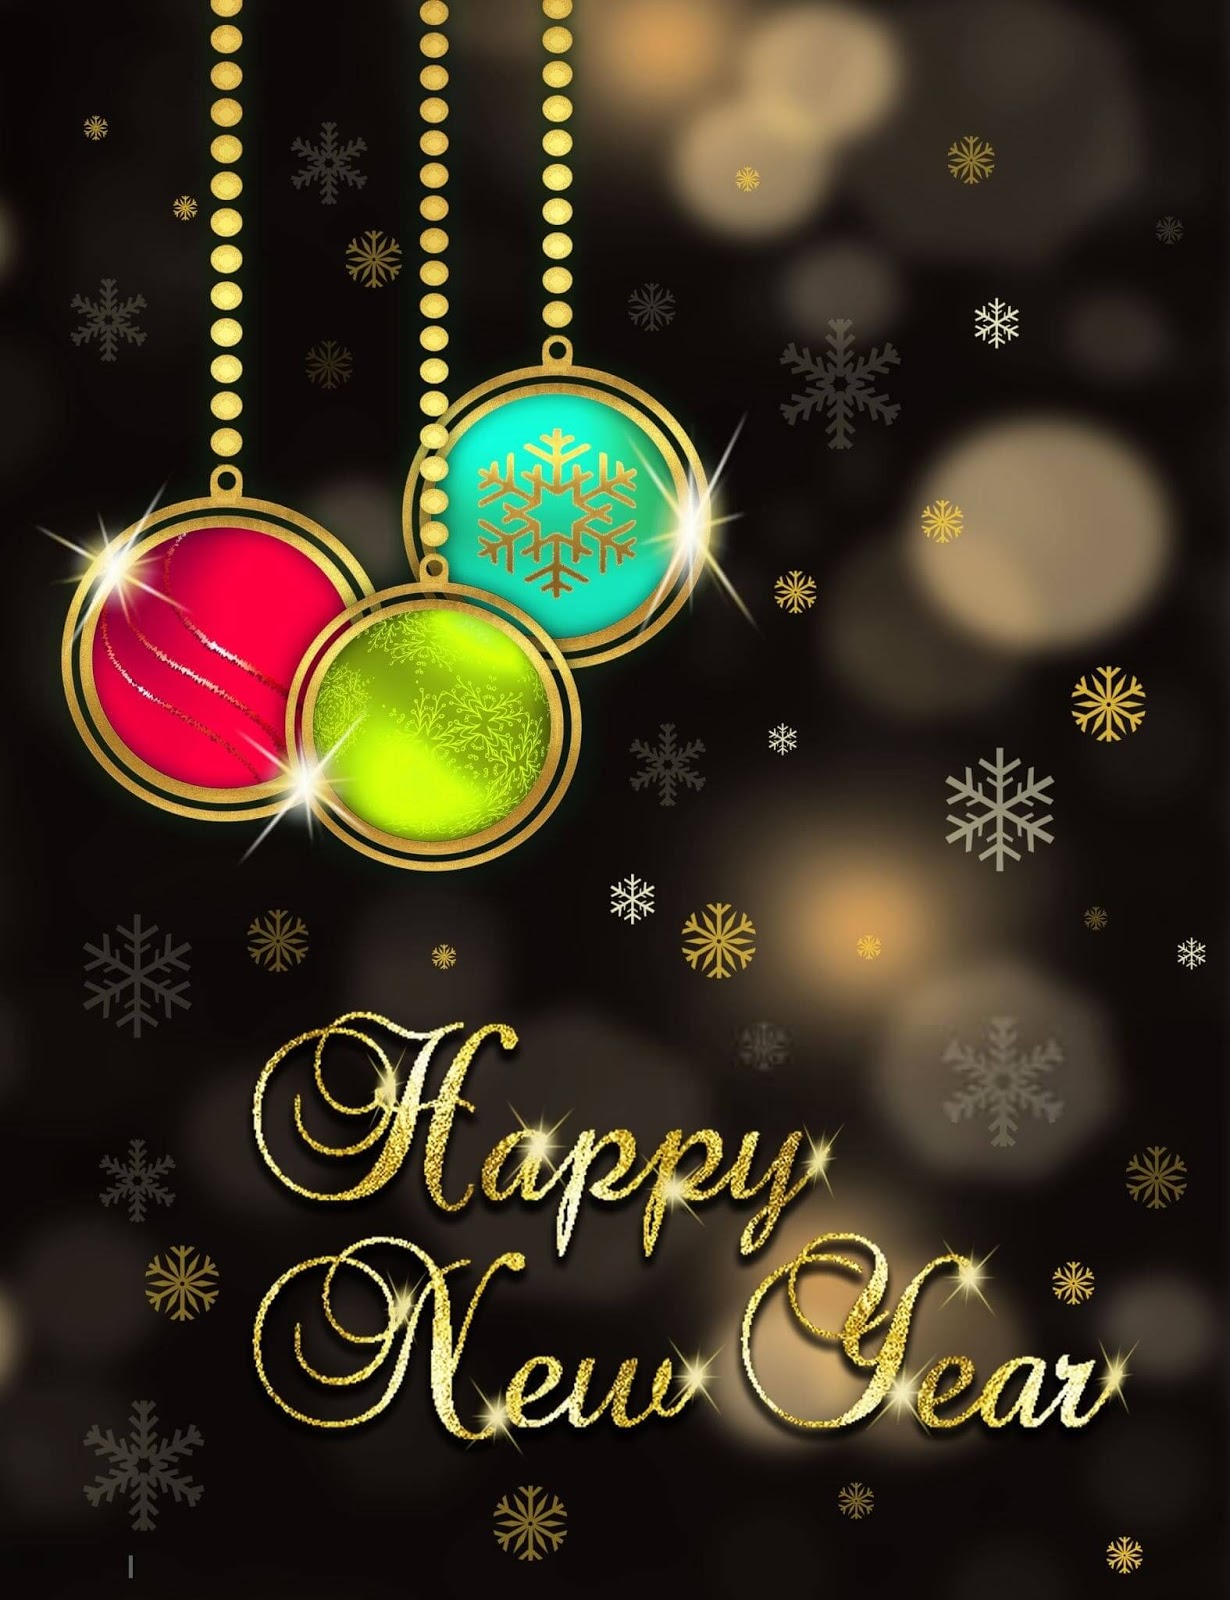 Happy New Year HD Wallpaper and Images Download Free